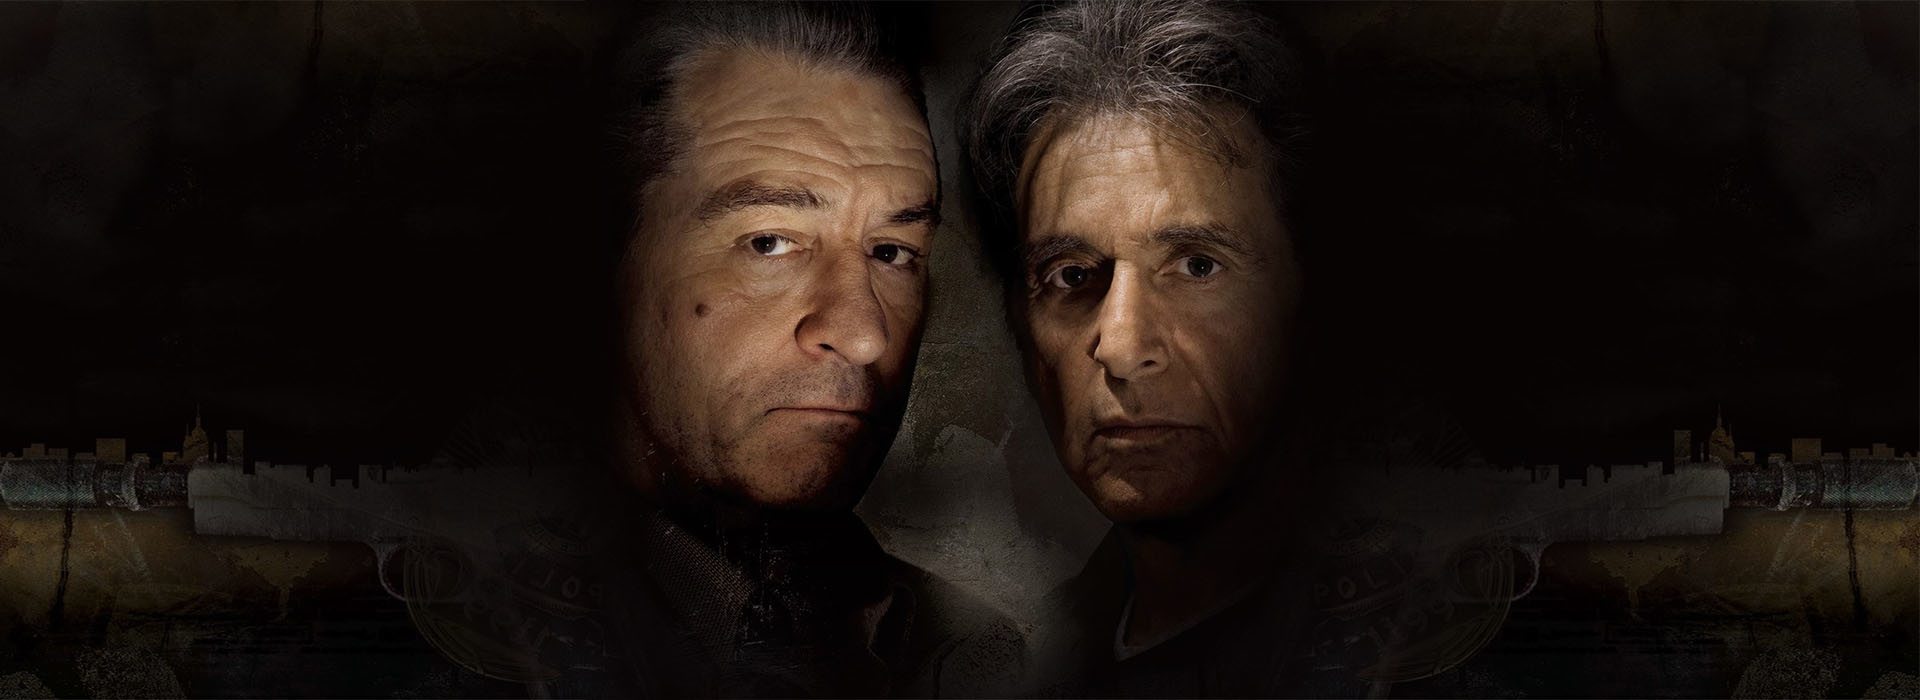 Movie poster Righteous Kill